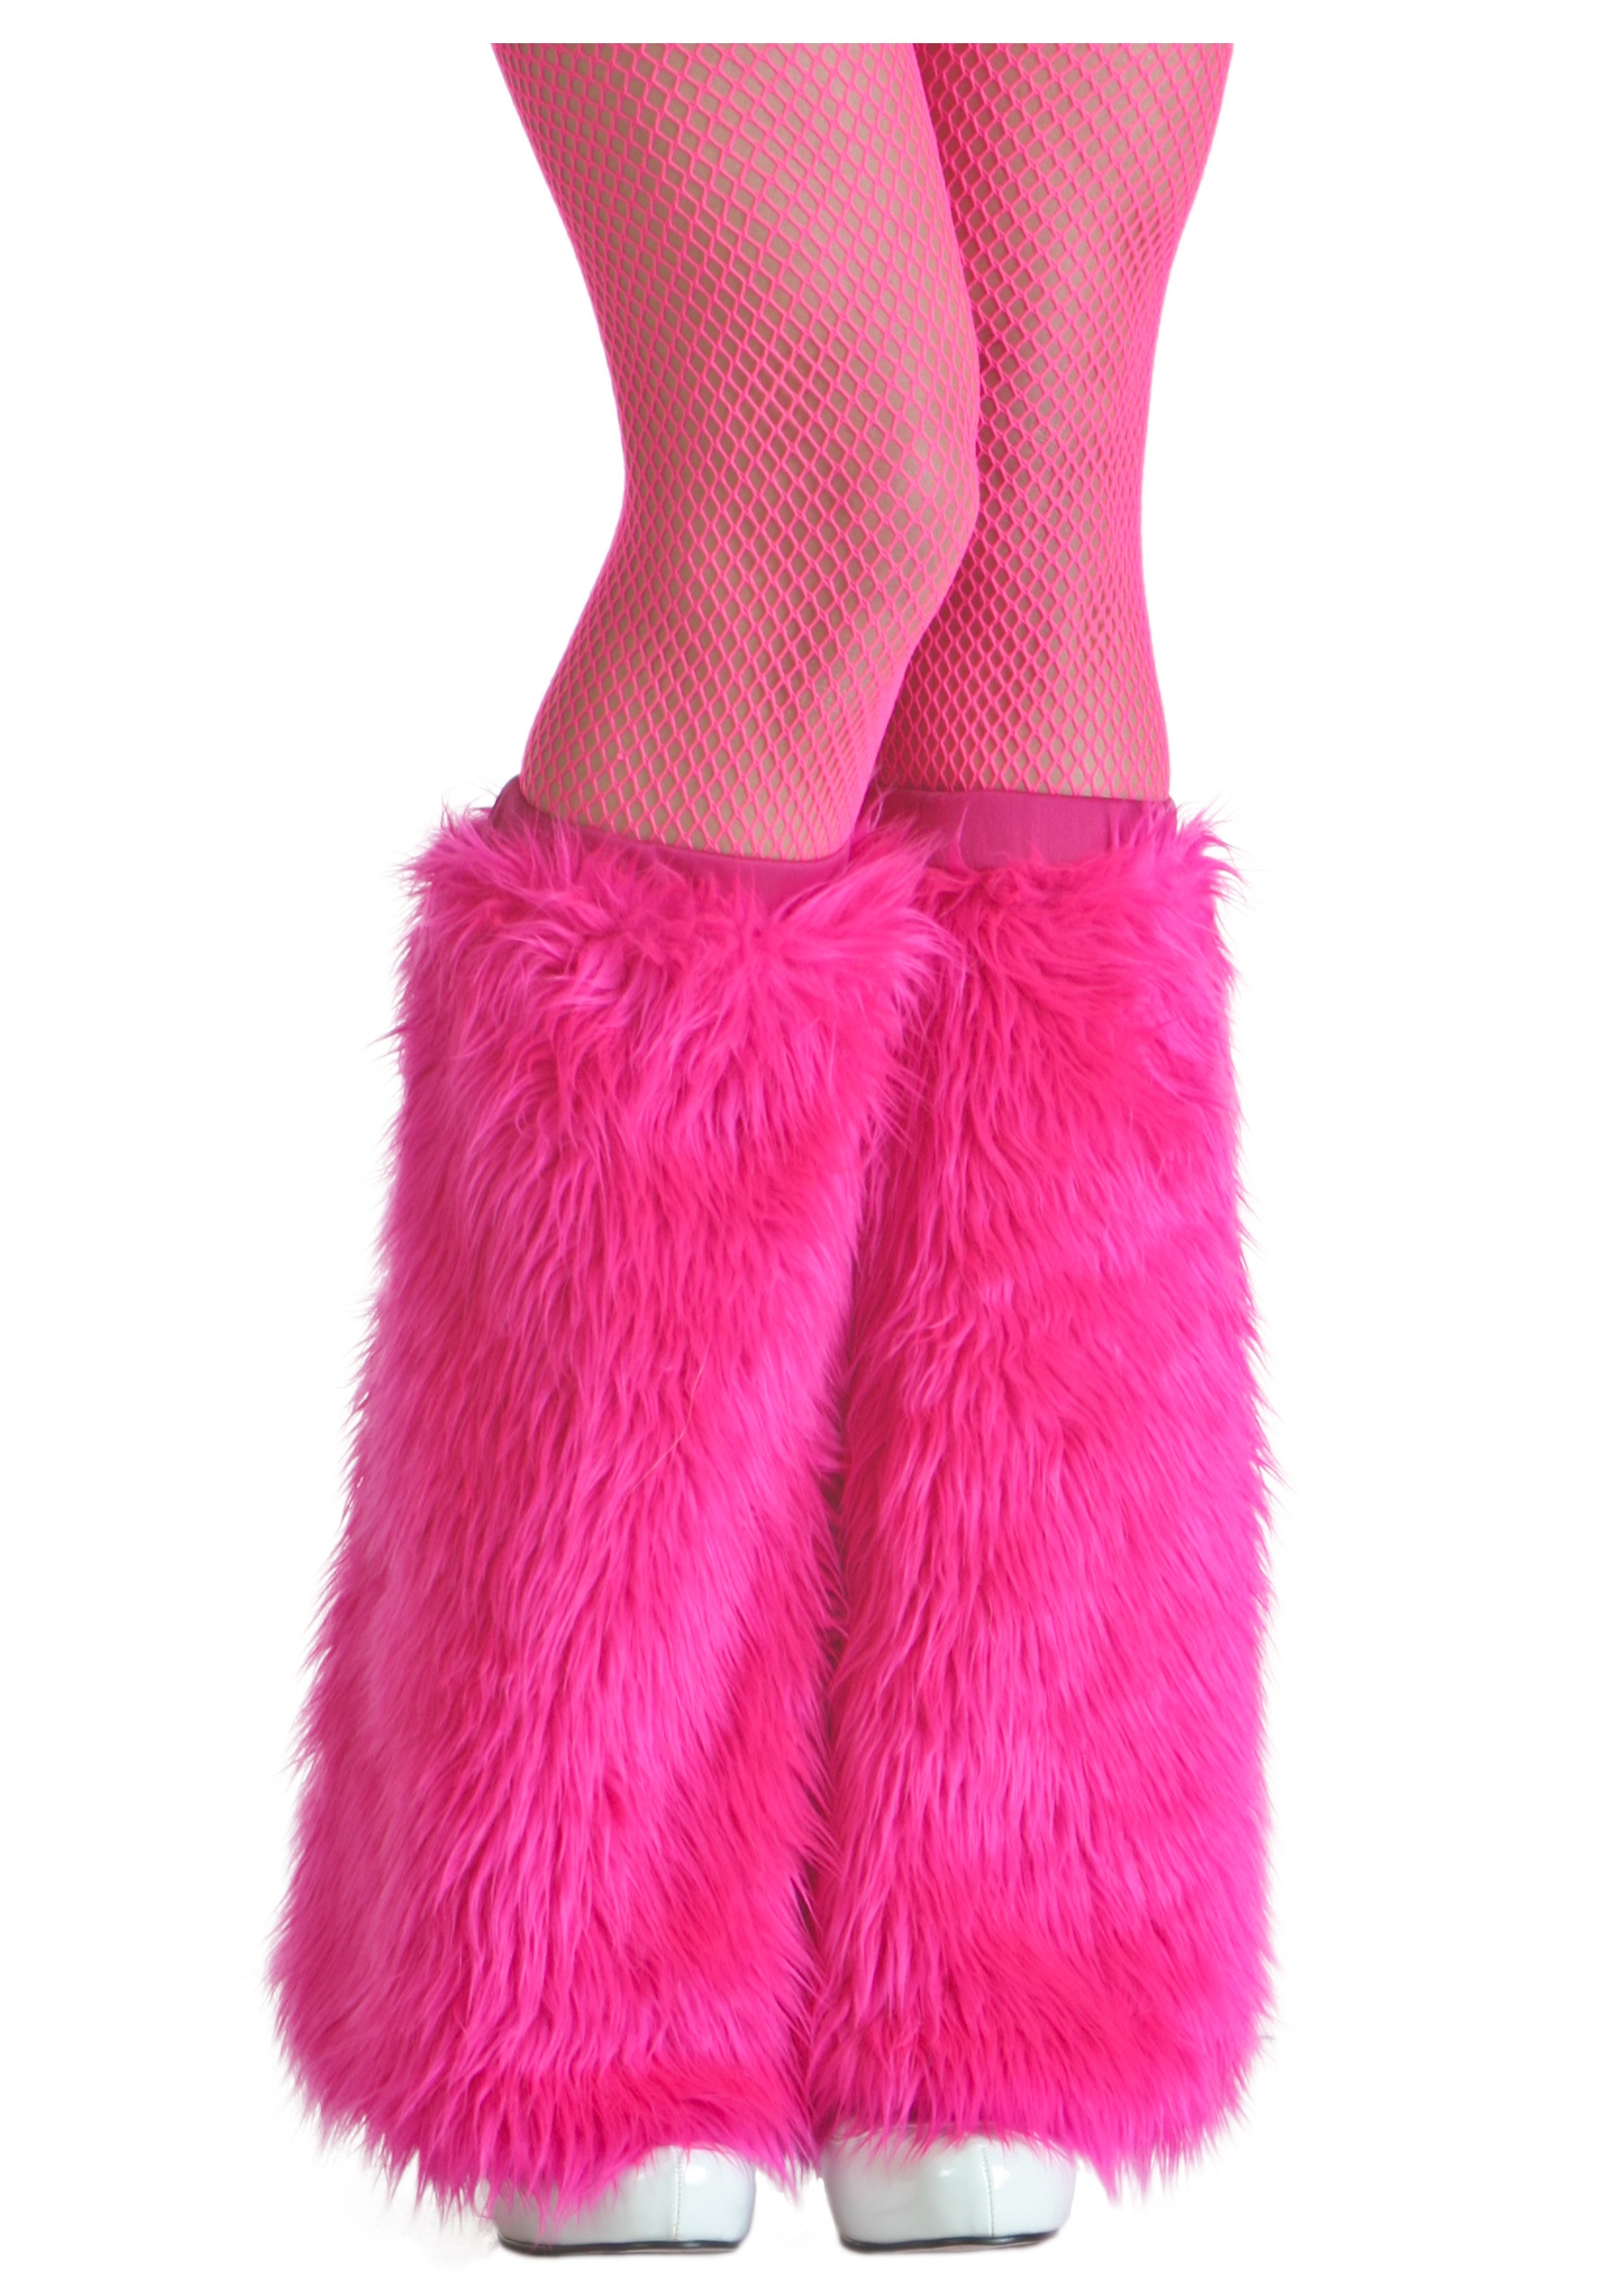 Adult Pink Faux Fur Boot Covers